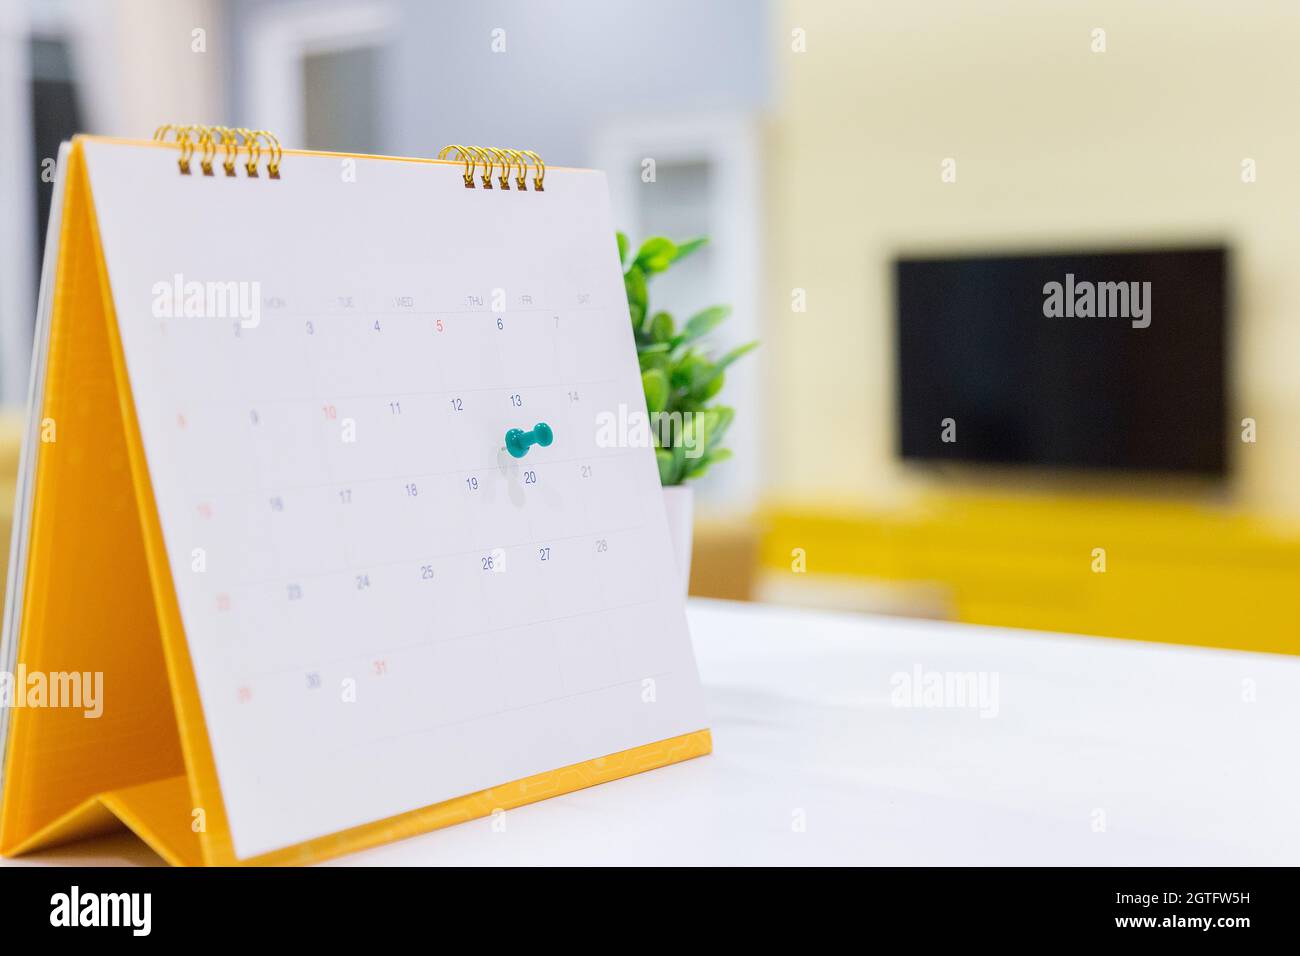 Calendar Event Planner Is Busy.calendar,clock To Set Timetable Organize Schedule,planning Stock Photo